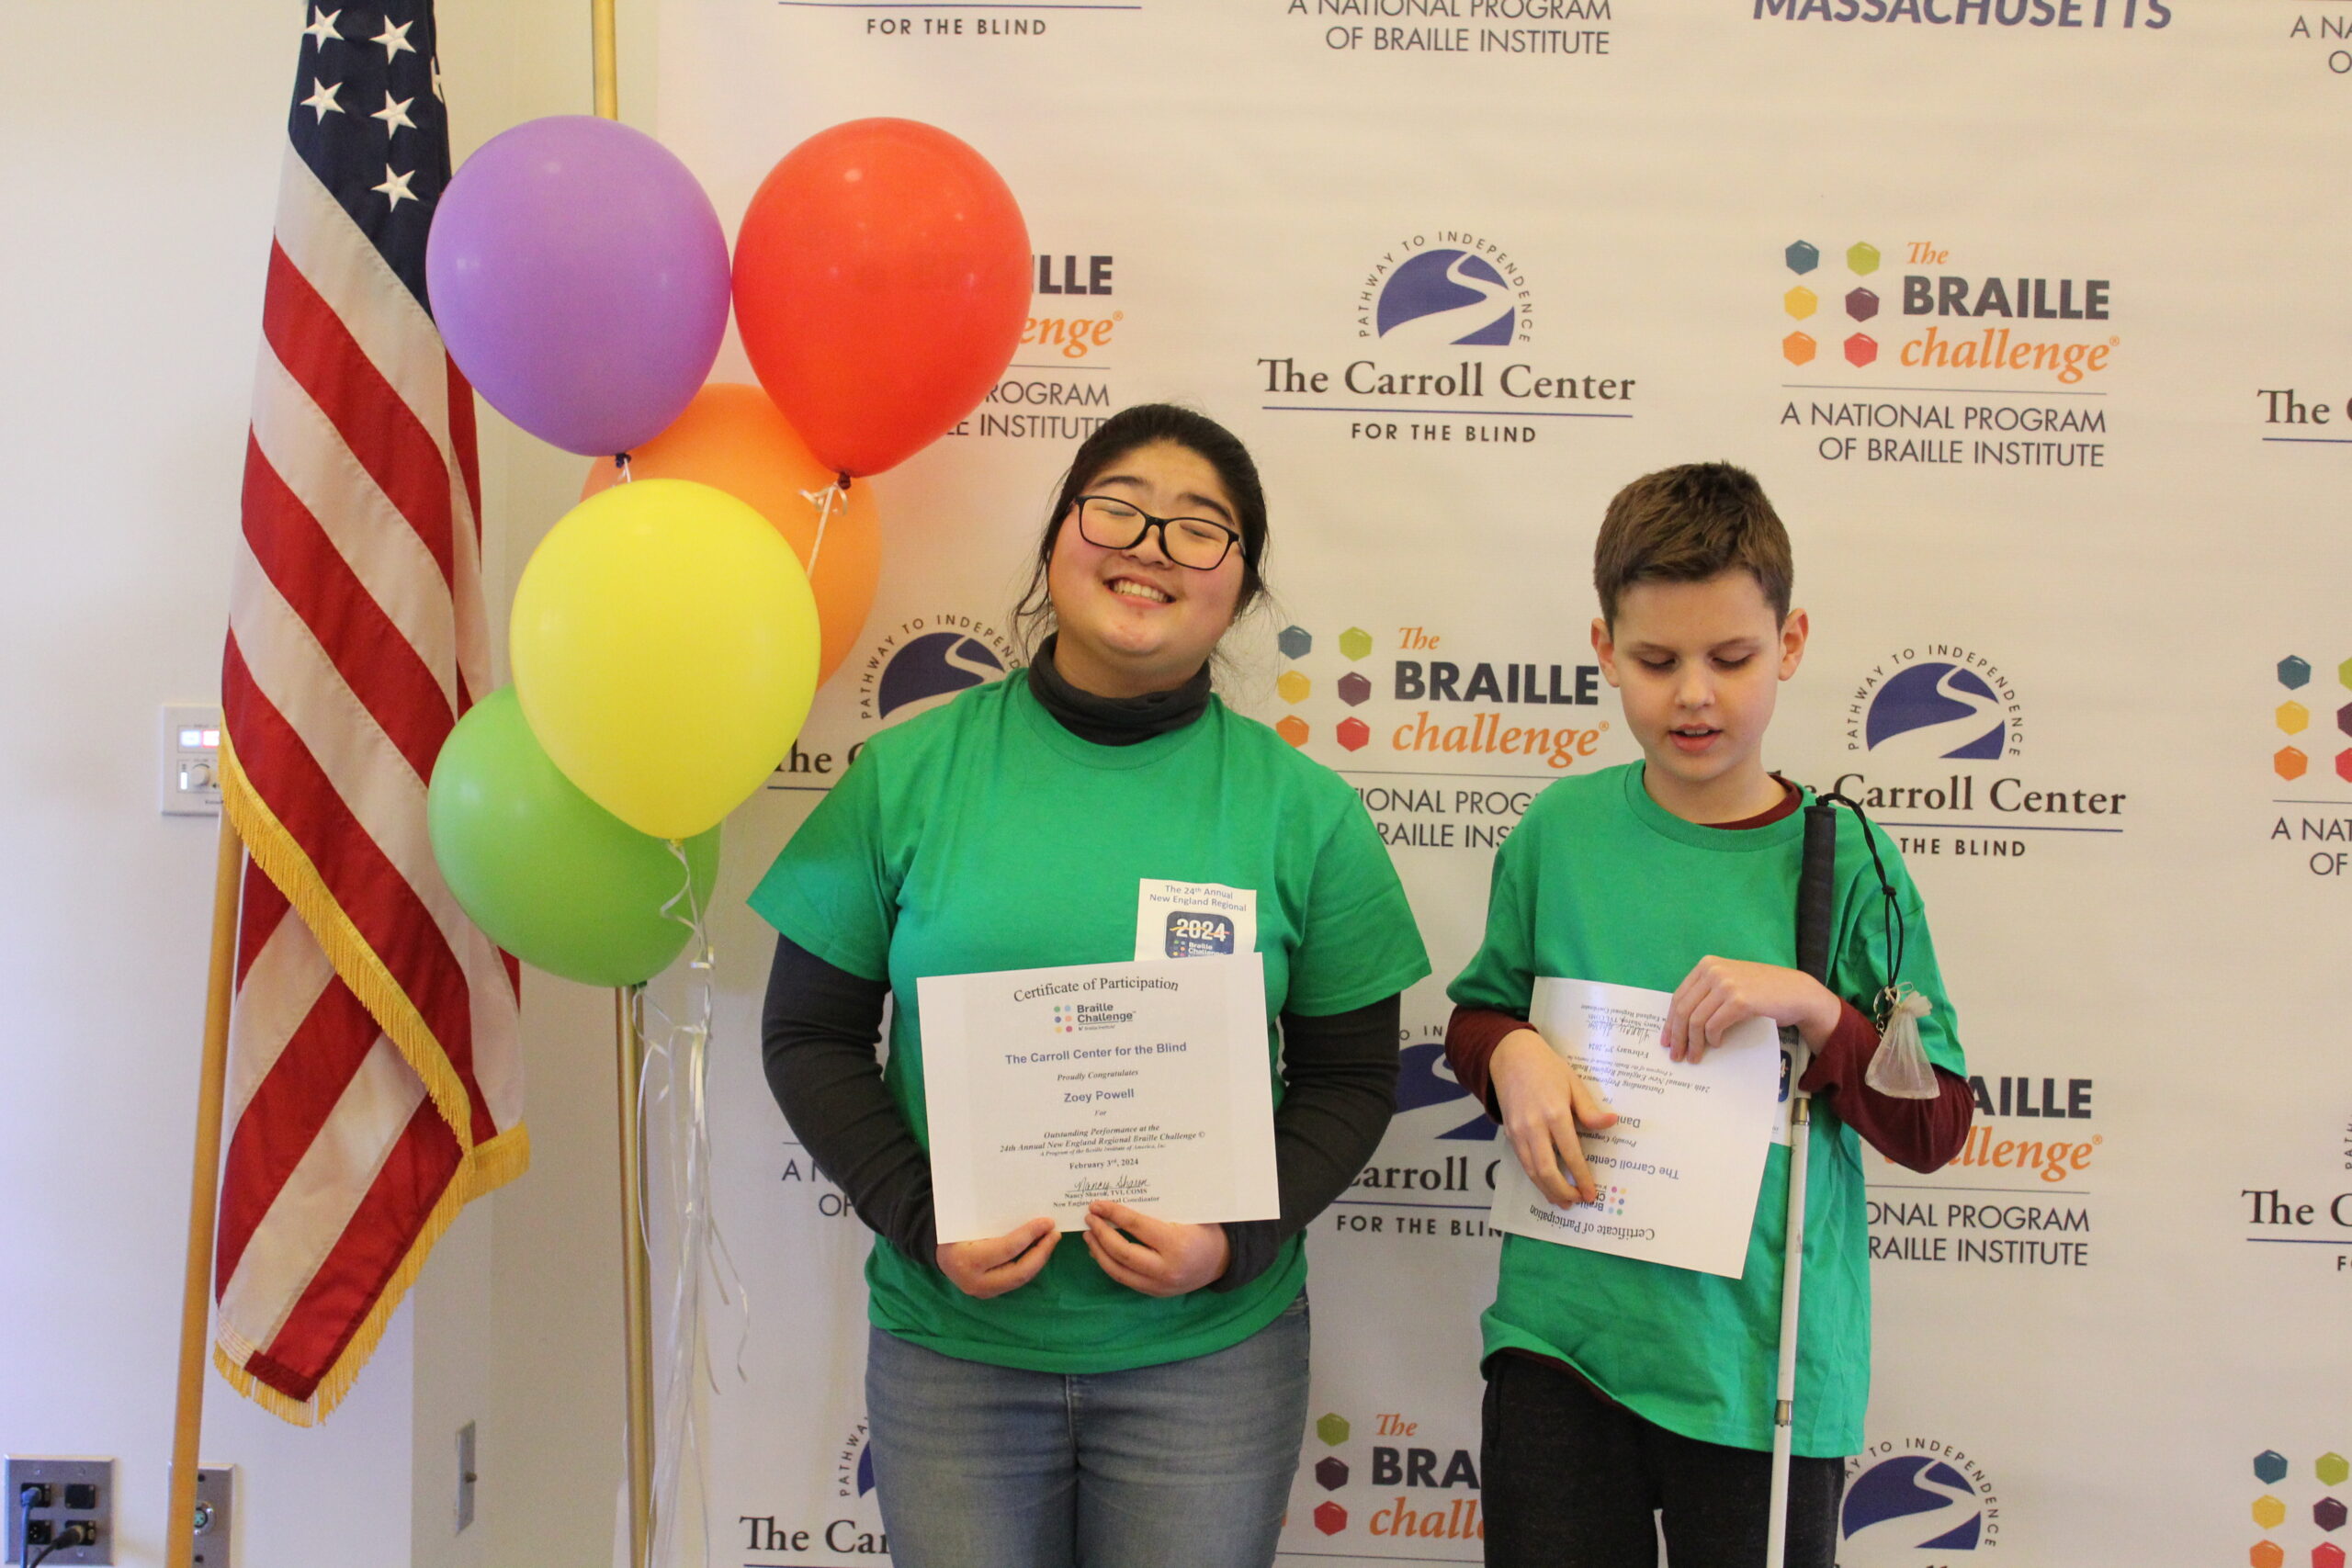 2 Braille Challenge participants smiling for a photo with certificates in front of the Carroll Center Braille Challenge backdrop